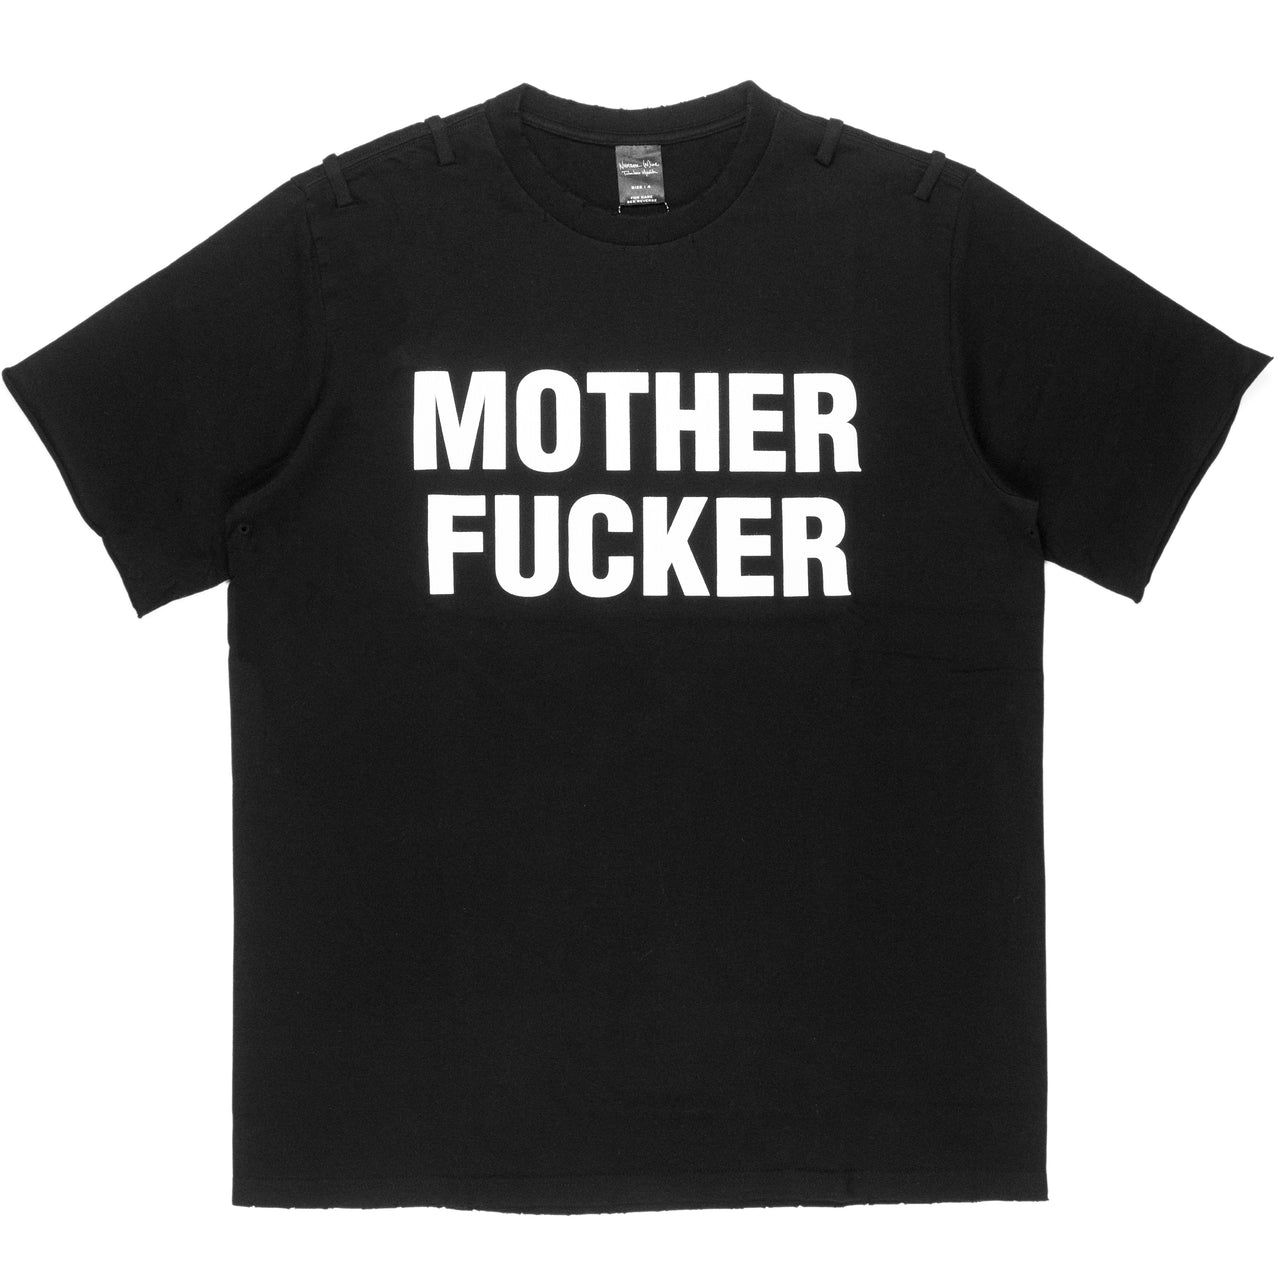 Number (N)ine “Motherfucker” Tee - SS06 “Welcome To The Shadow”